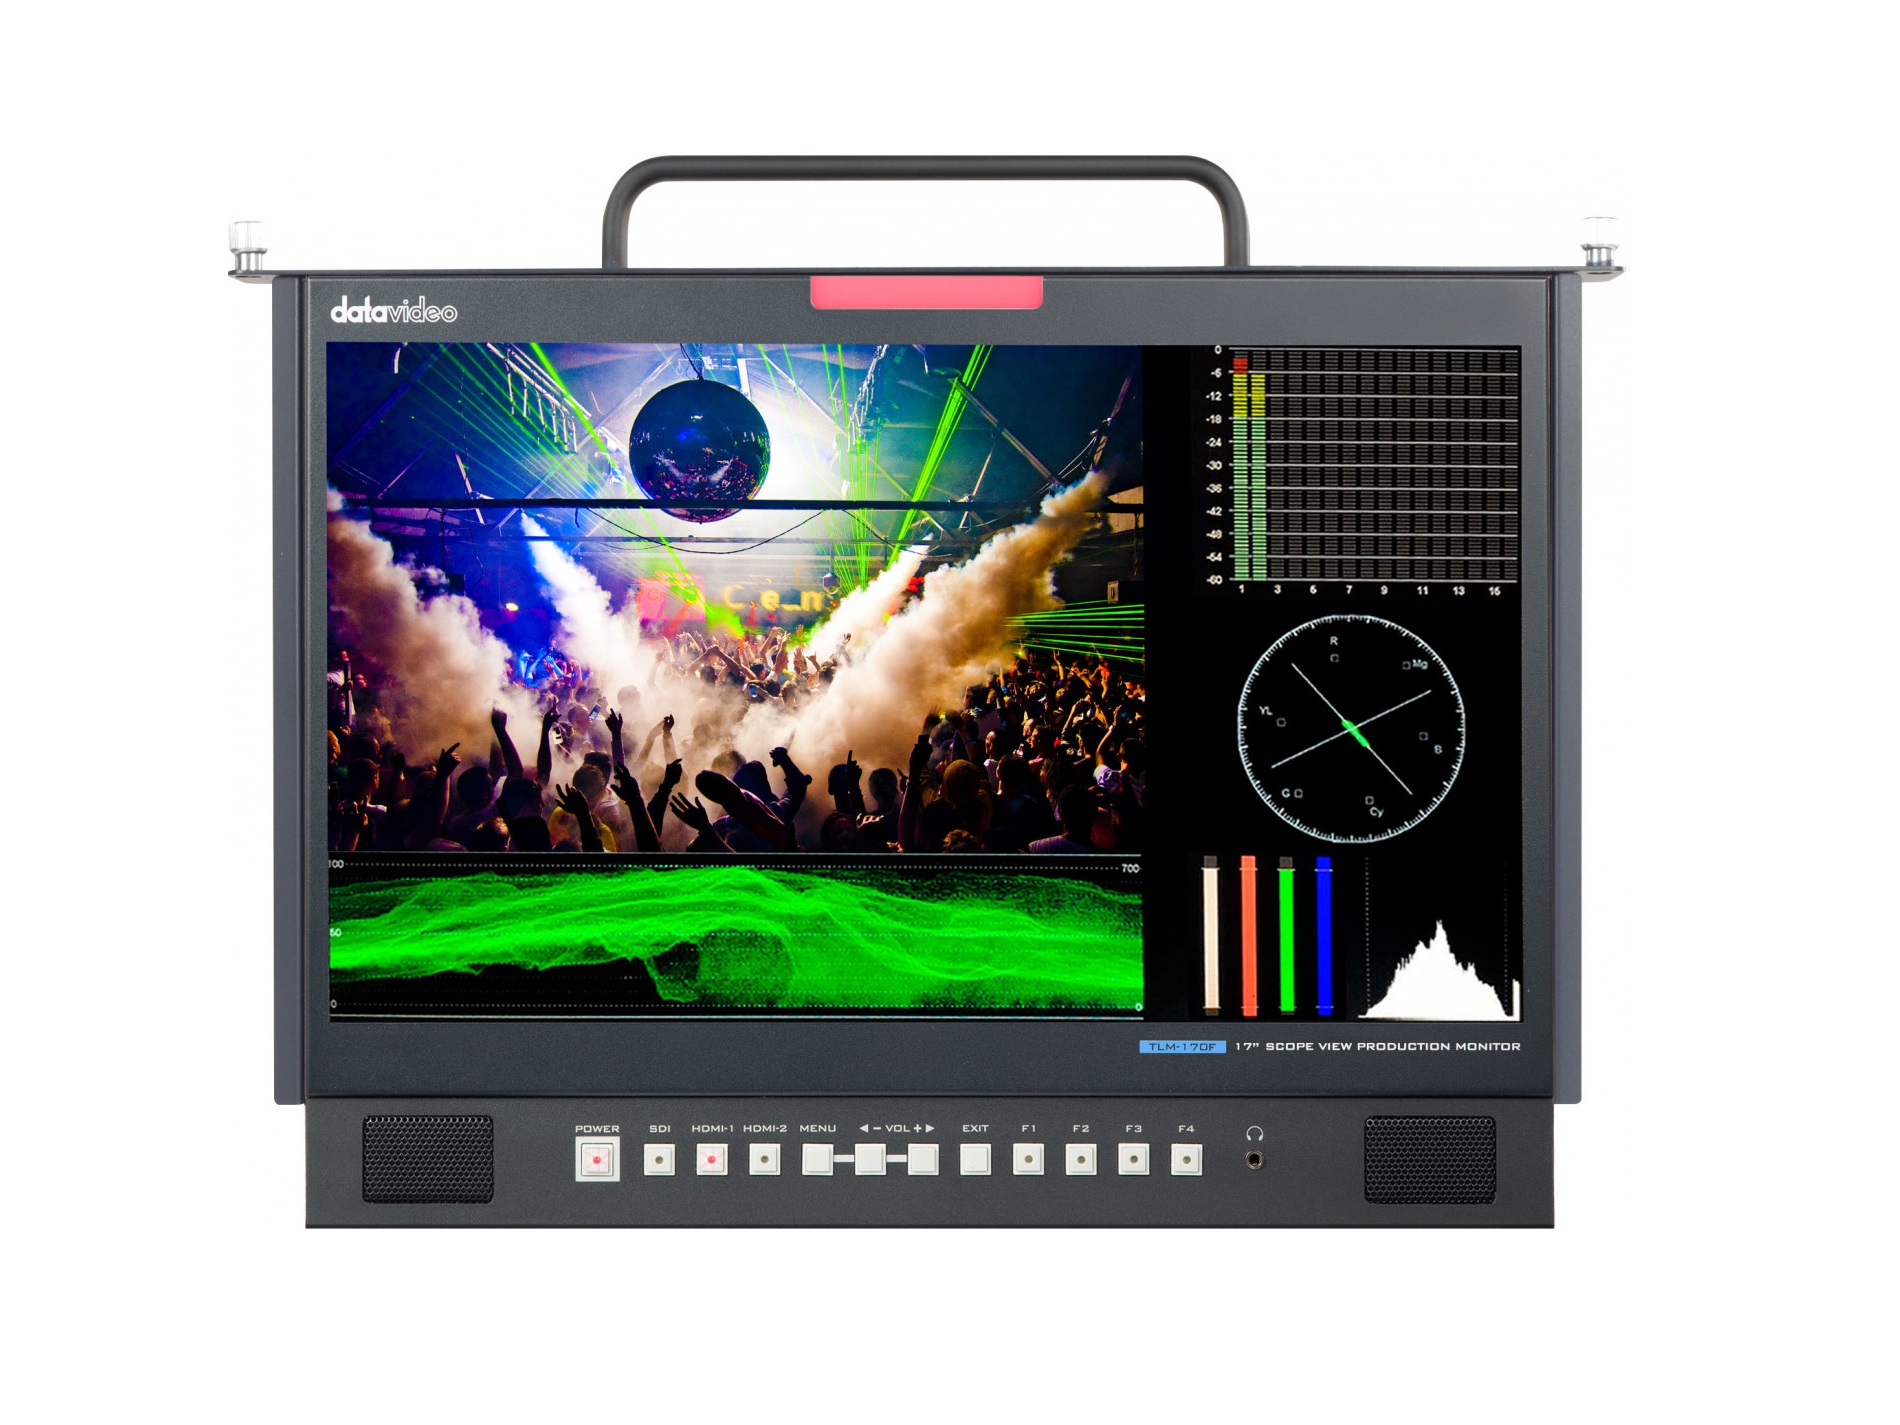 TLM-170FM 17 inch ScopeView Production Monitor-1U Foldable Rackmount Tray Unit by Datavideo